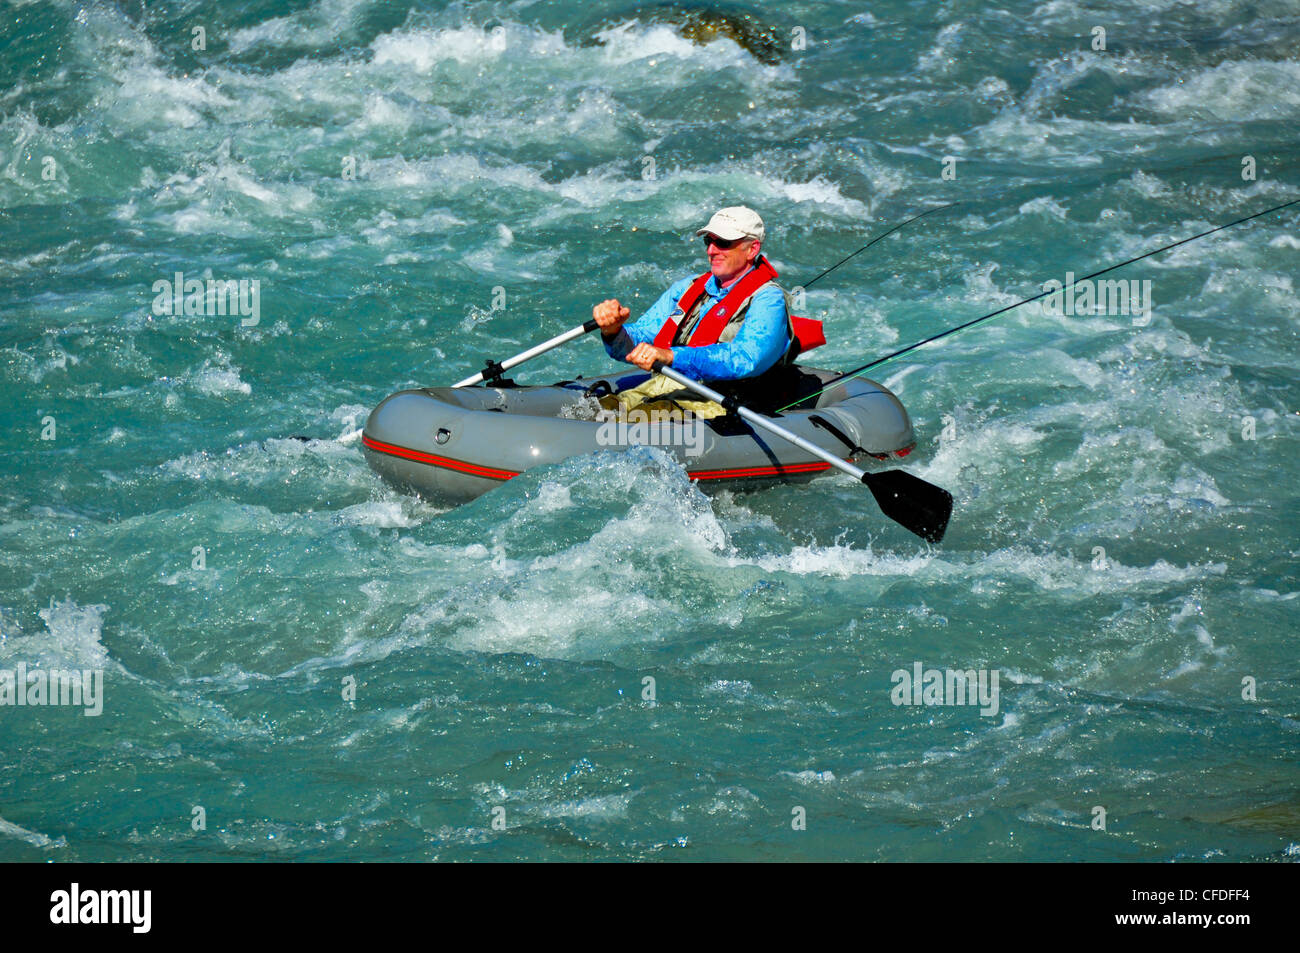 Man in raft, fly fishing, Copper River, British Columbia, Canada Stock Photo